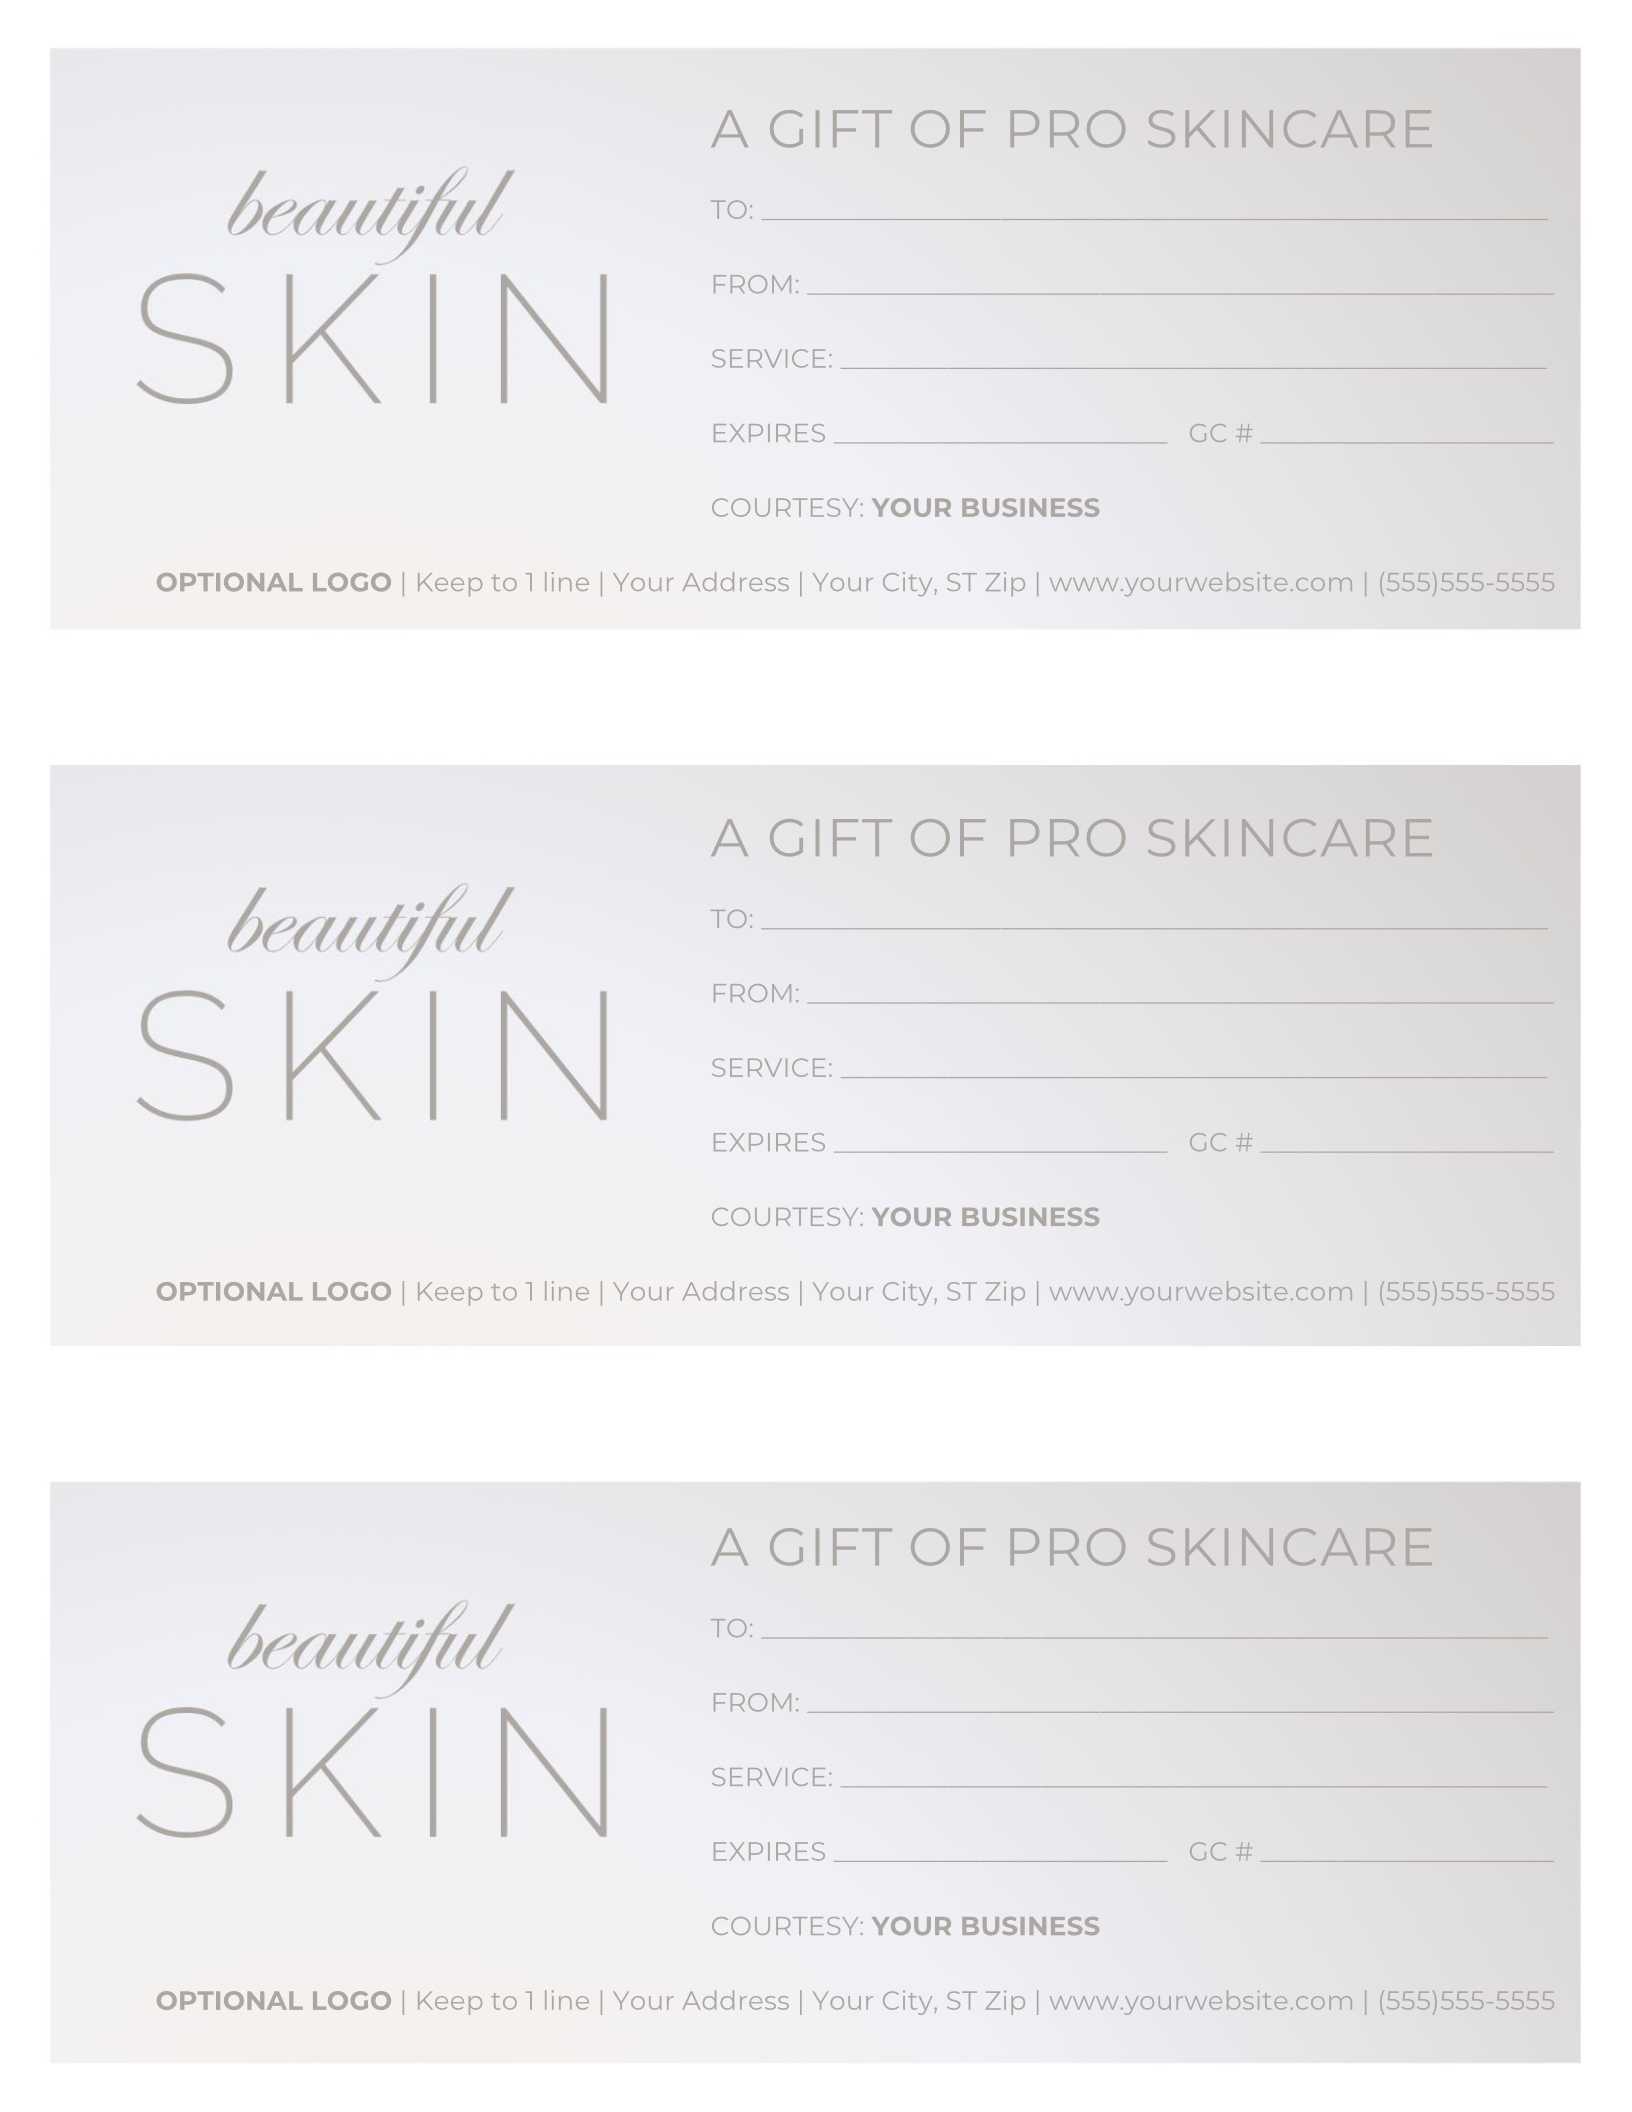 Free Gift Certificate Templates For Massage And Spa With Regard To Massage Gift Certificate Template Free Printable